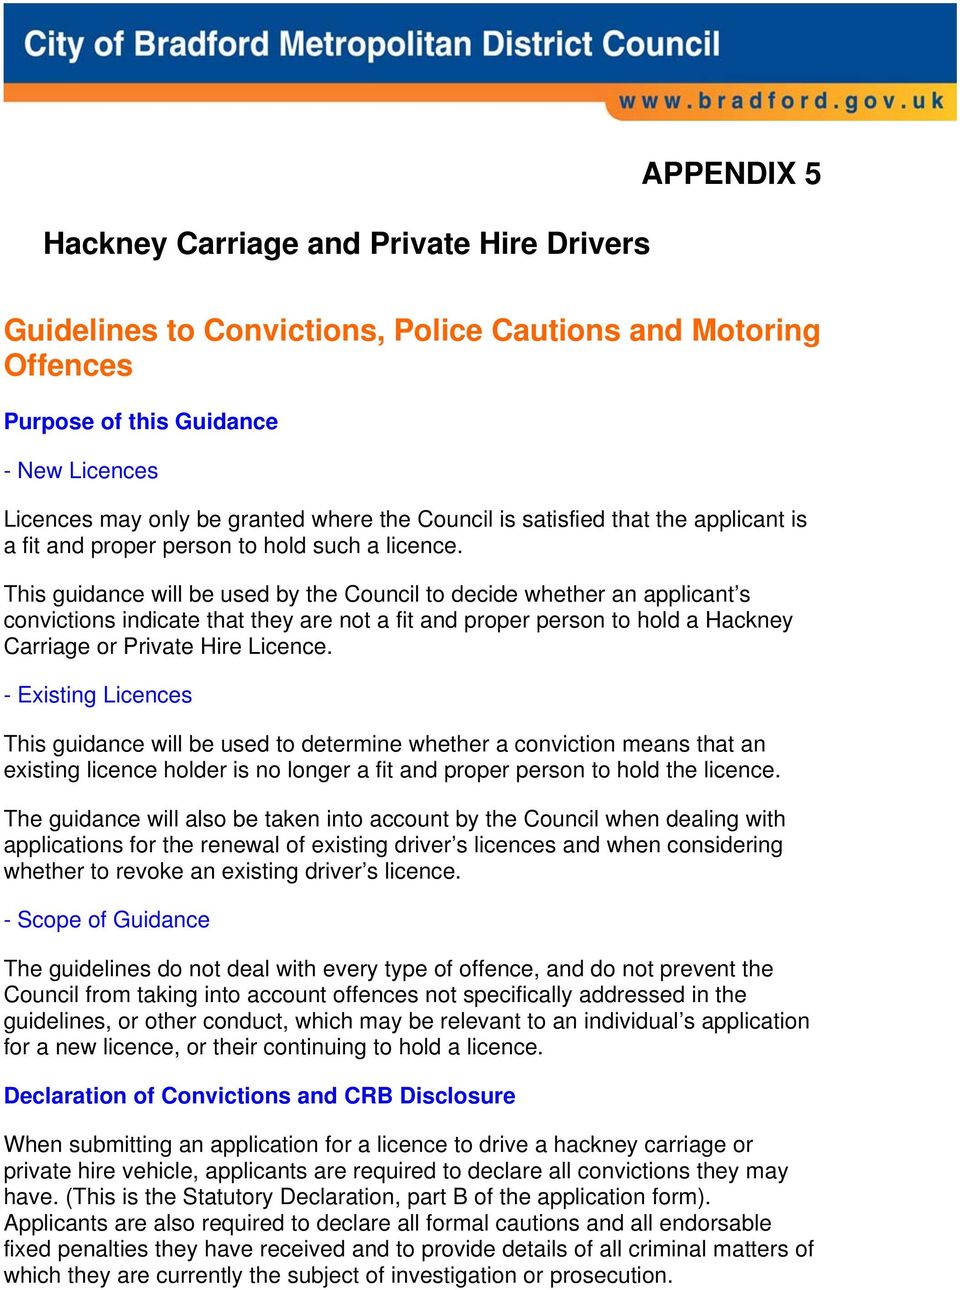 This guidance will be used by the Council to decide whether an applicant s convictions indicate that they are not a fit and proper person to hold a Hackney Carriage or Private Hire Licence.